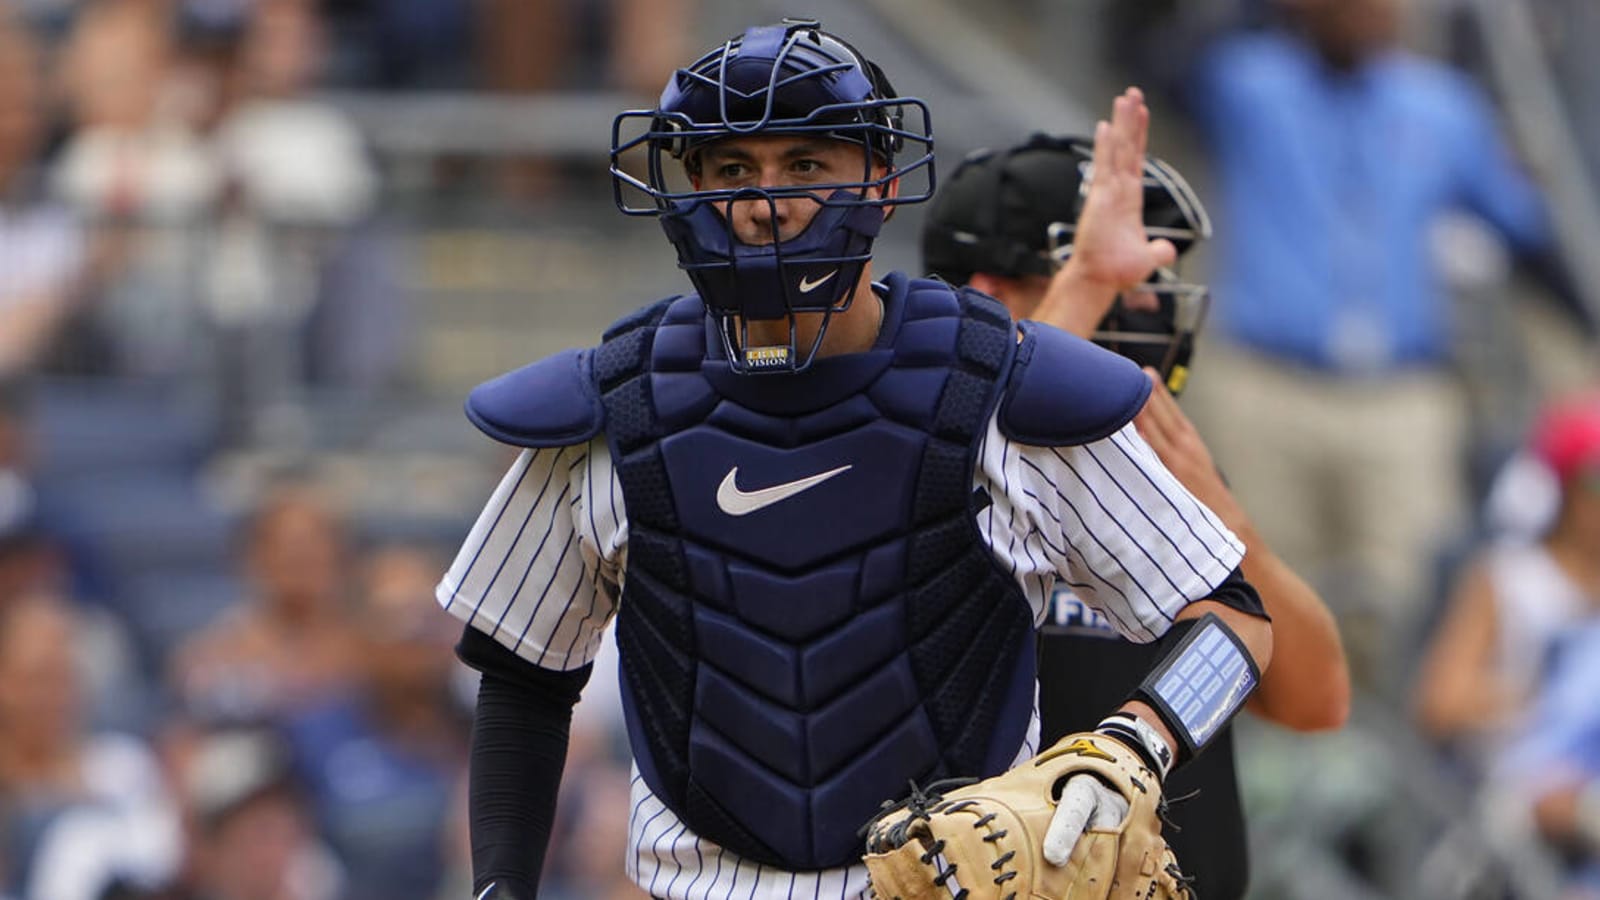 Yankees catcher pledges game-worn cup to fan who catches Aaron